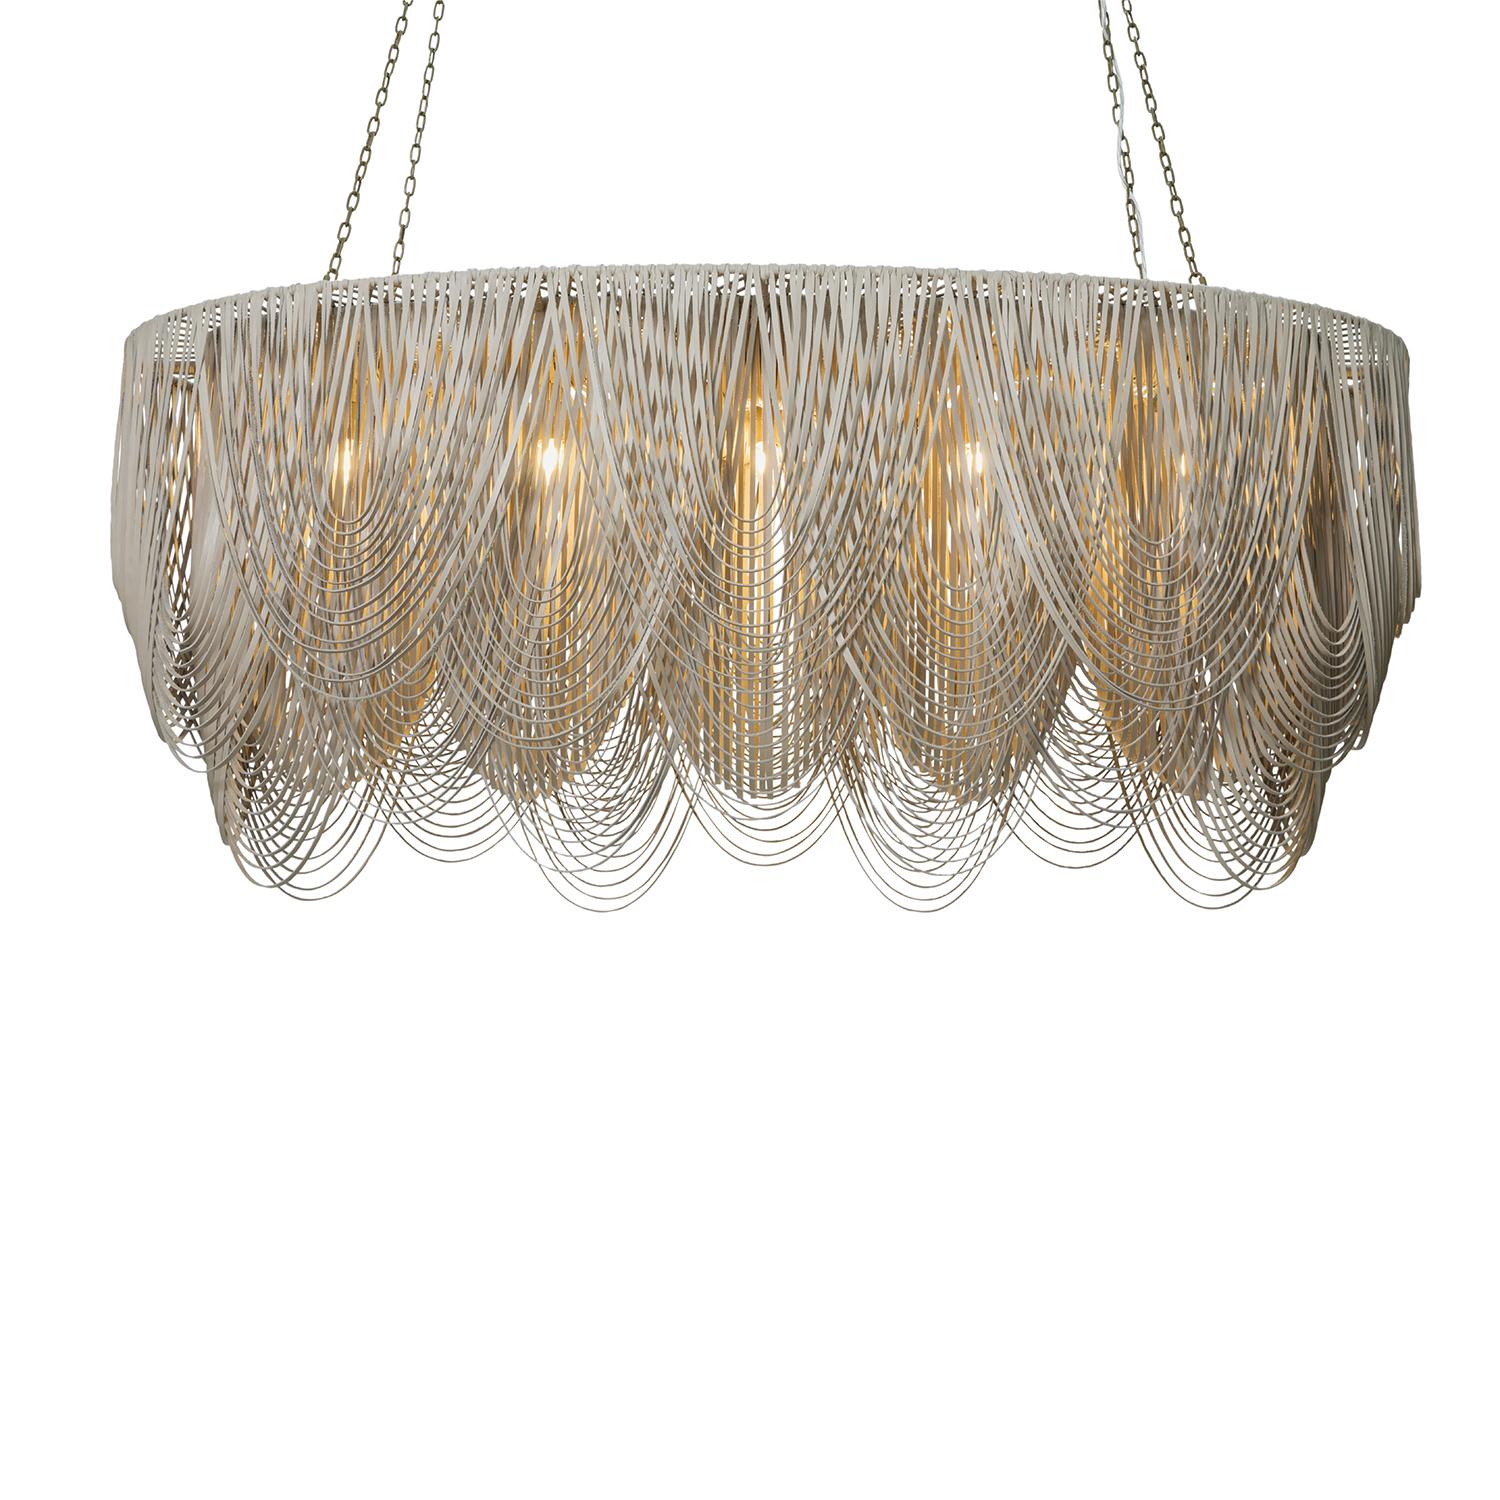 Large Oval Whisper Leather Chandelier in Cream-Stone Leather